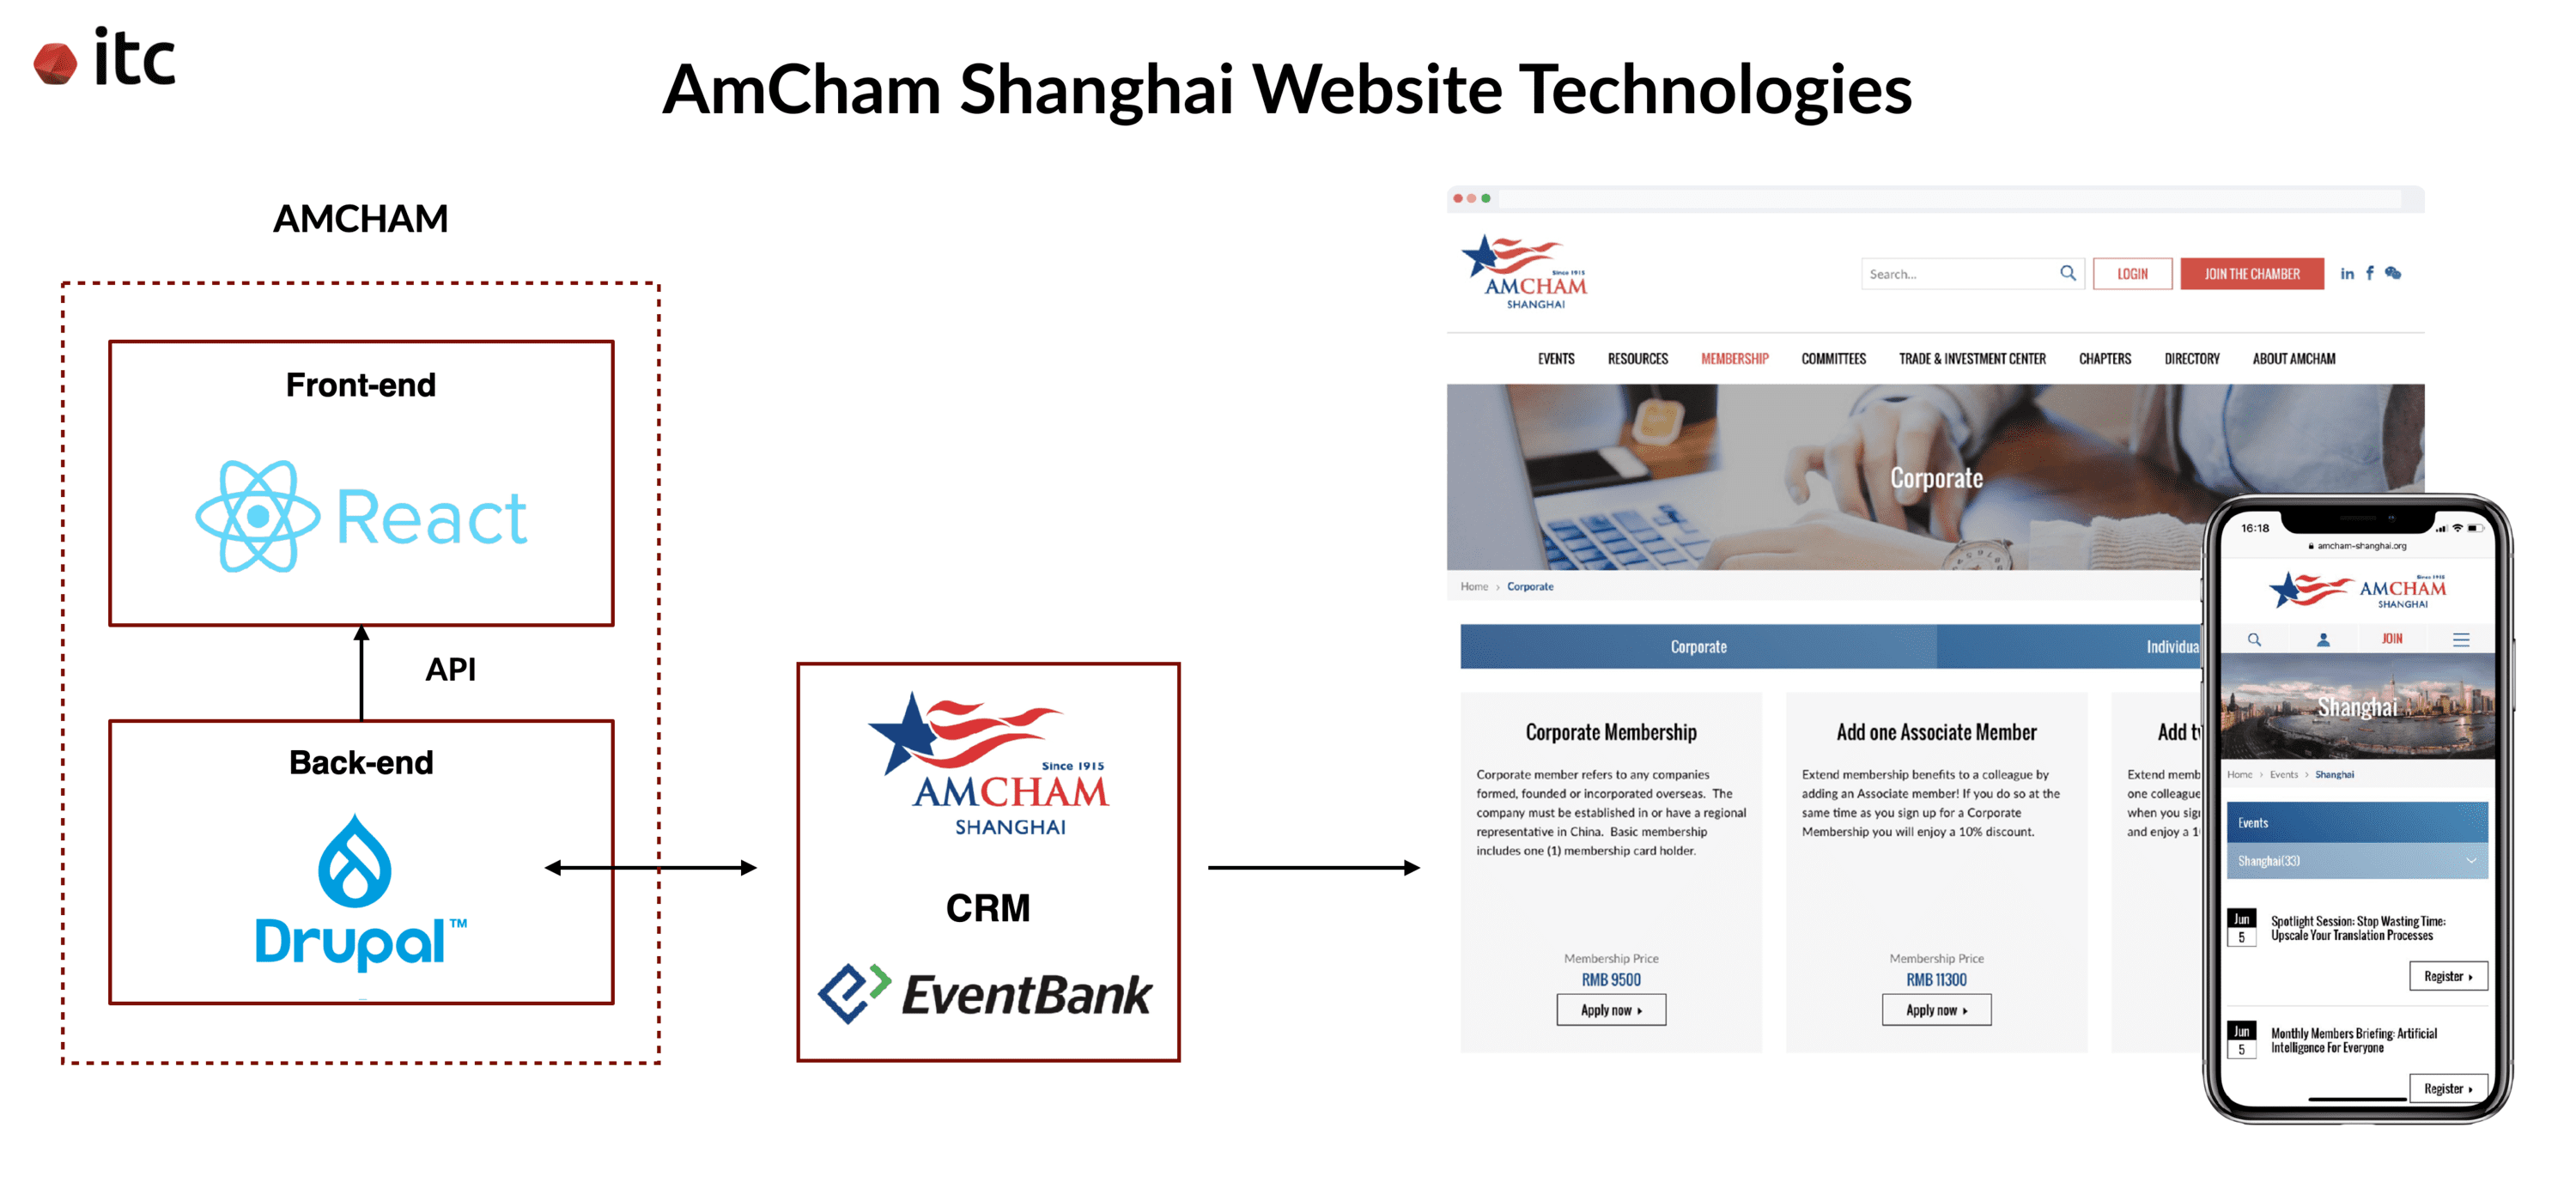 ITC developed a headless architecture for AmCham Shanghai website. The frontend is React, connected via API to the backend framework Drupal 8. The backend is also connected via API to the CRM tool built with EventBank.